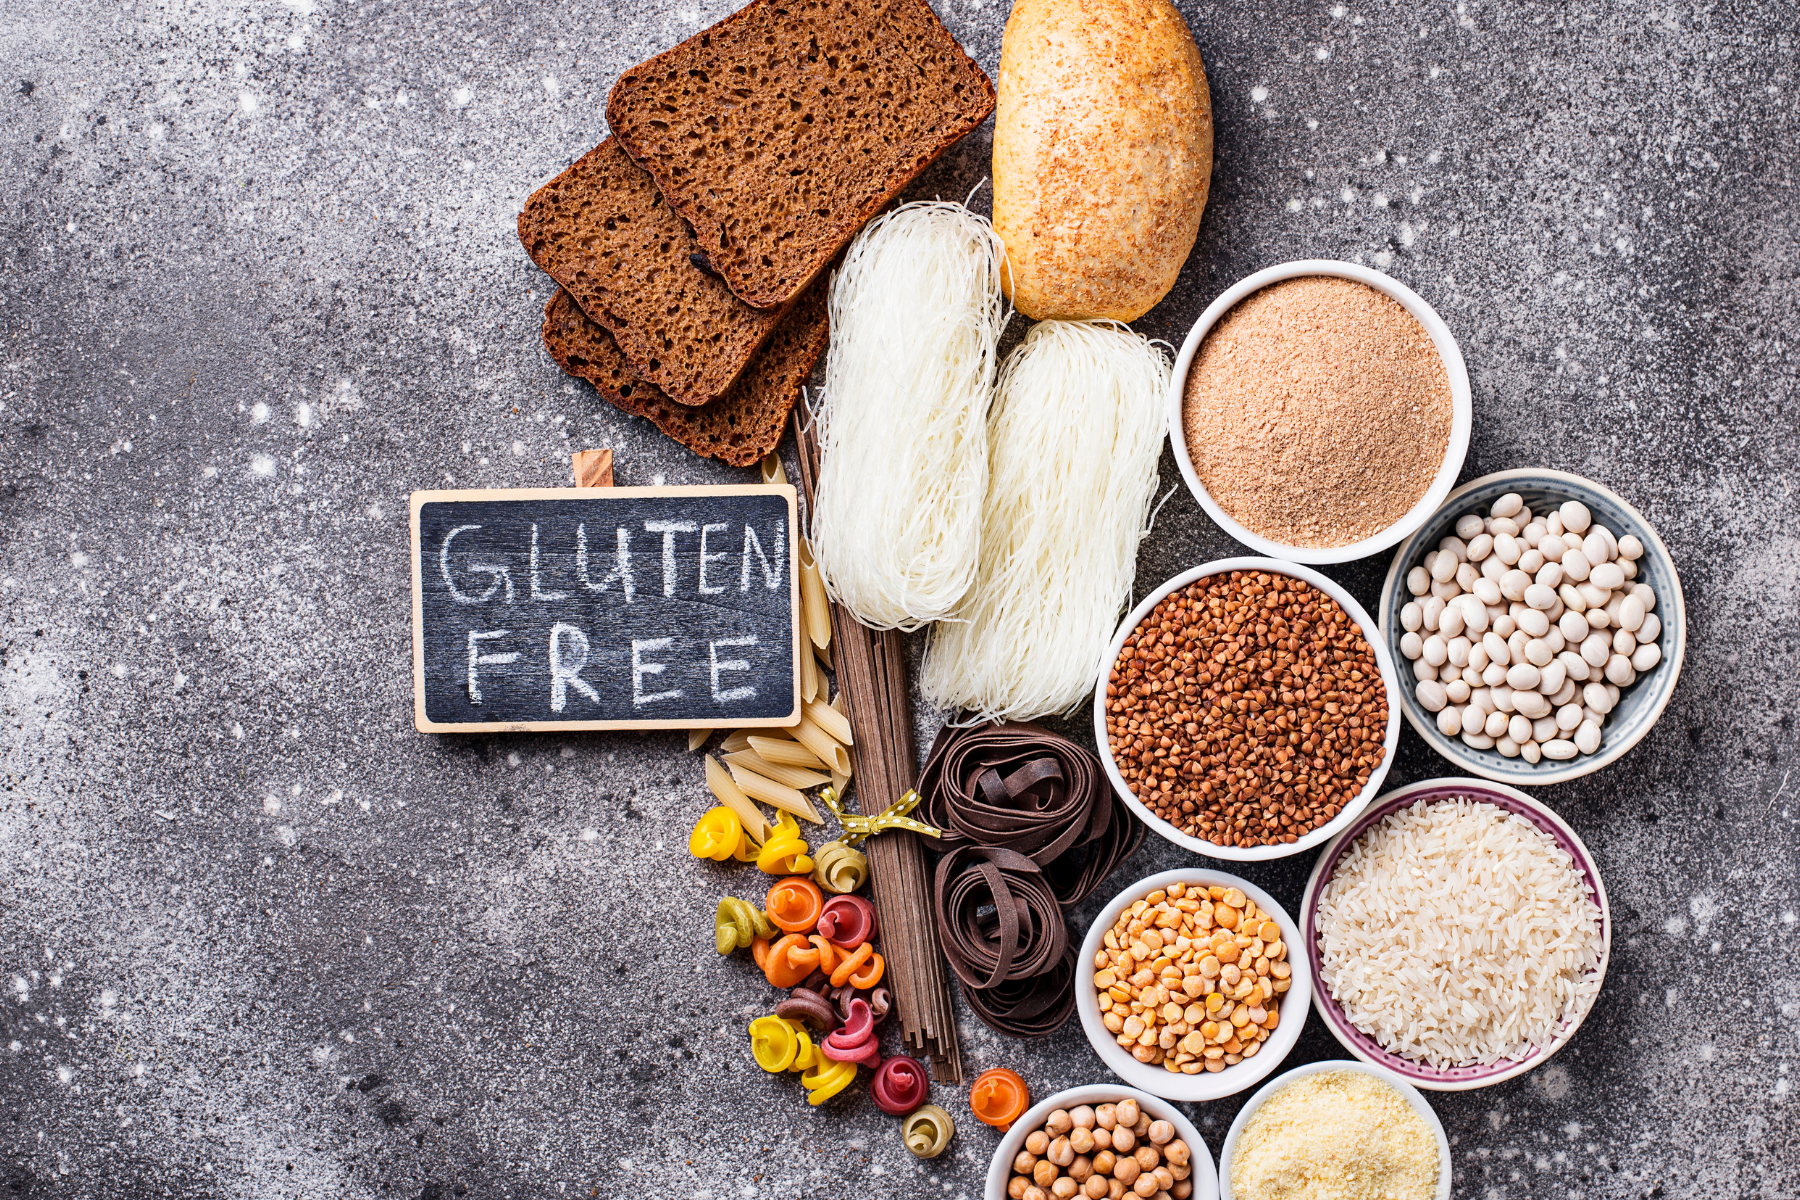 Gluten-Free Diet - is it for everyone?